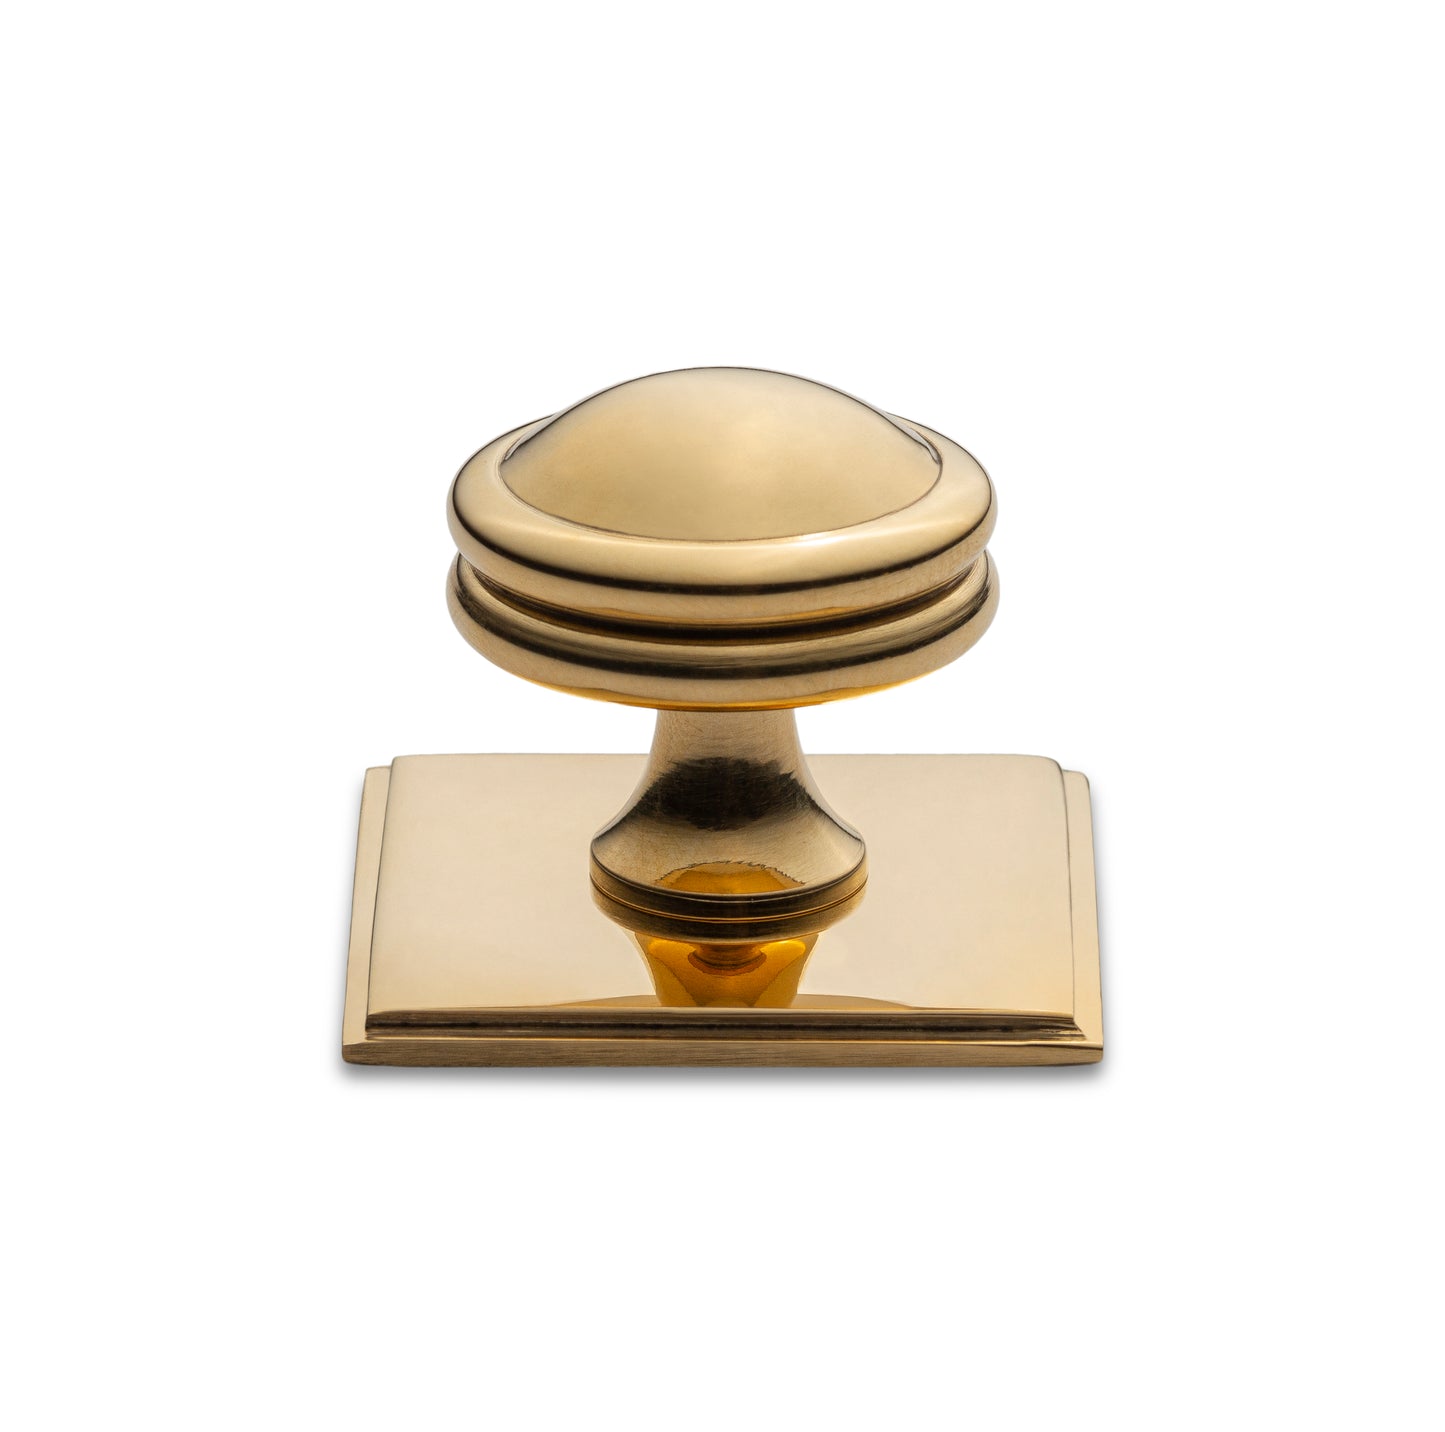 Palladio Domed Cabinet Knob on Stepped Plate